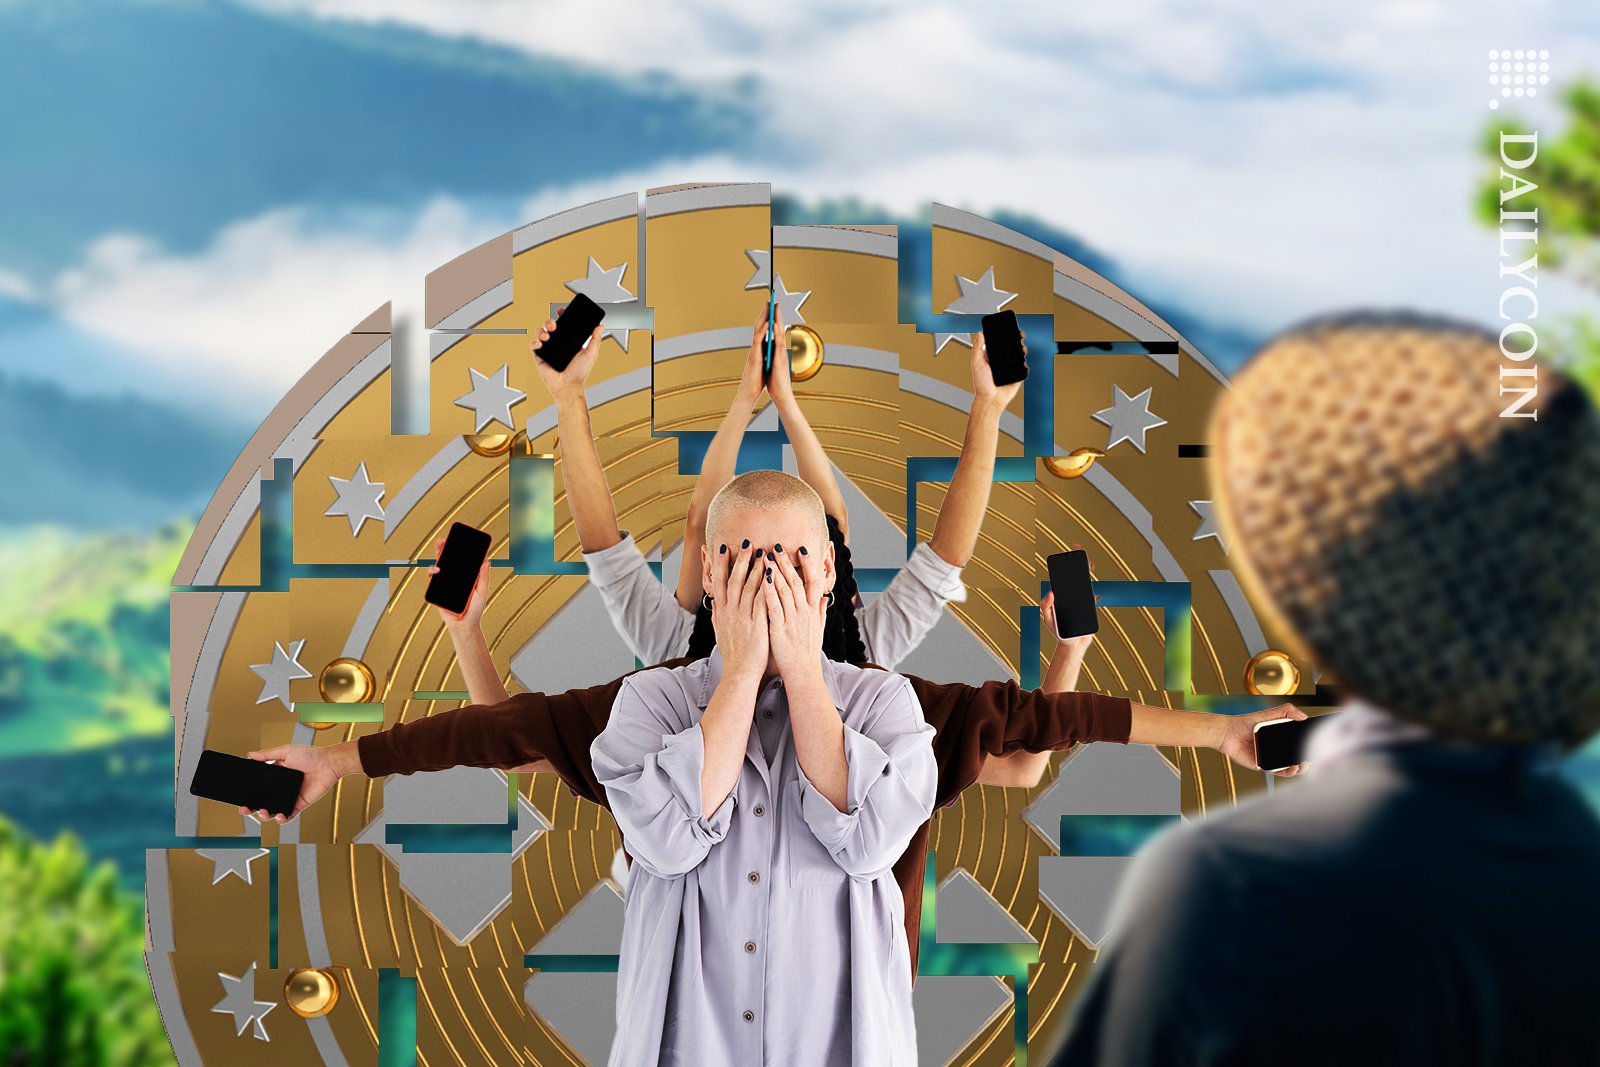 Hands in air with mobile phones and a girl is covering her face in dissbelief. Binance logo is breaking up into pieces in Asia.